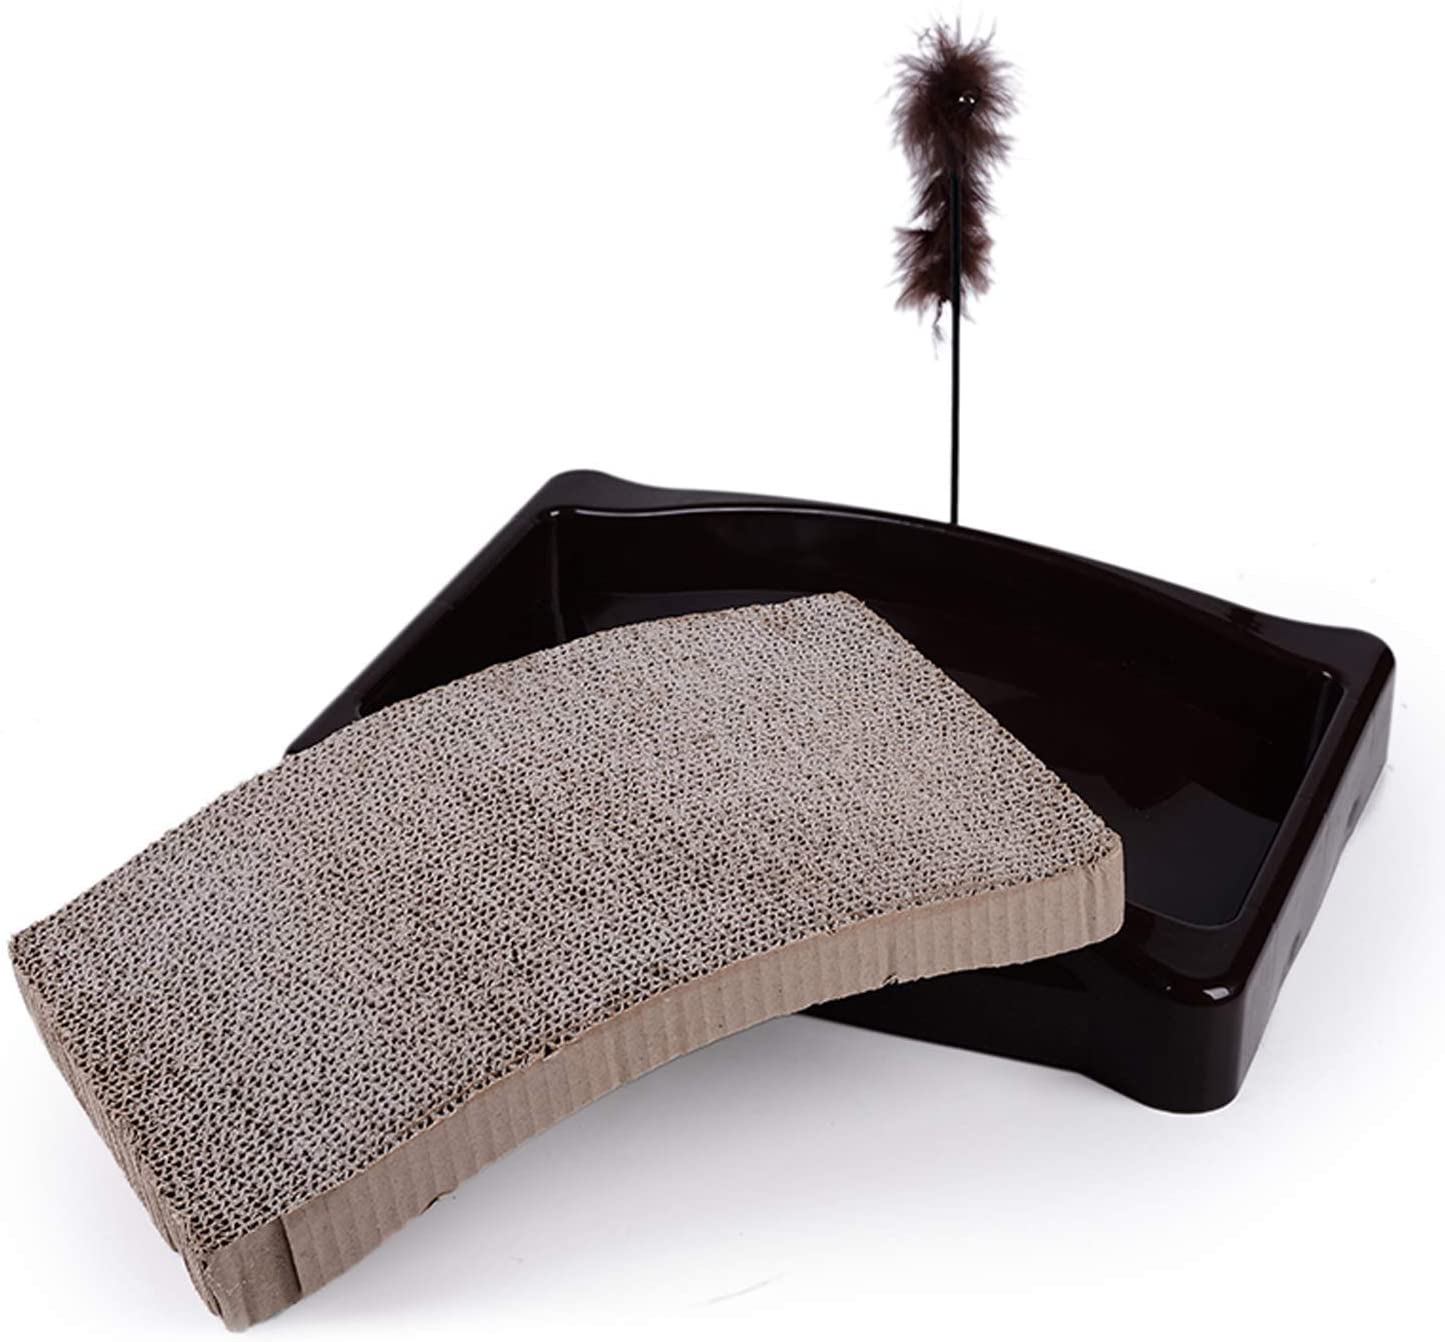 Scratching board for cats with a catnip 44x34cm